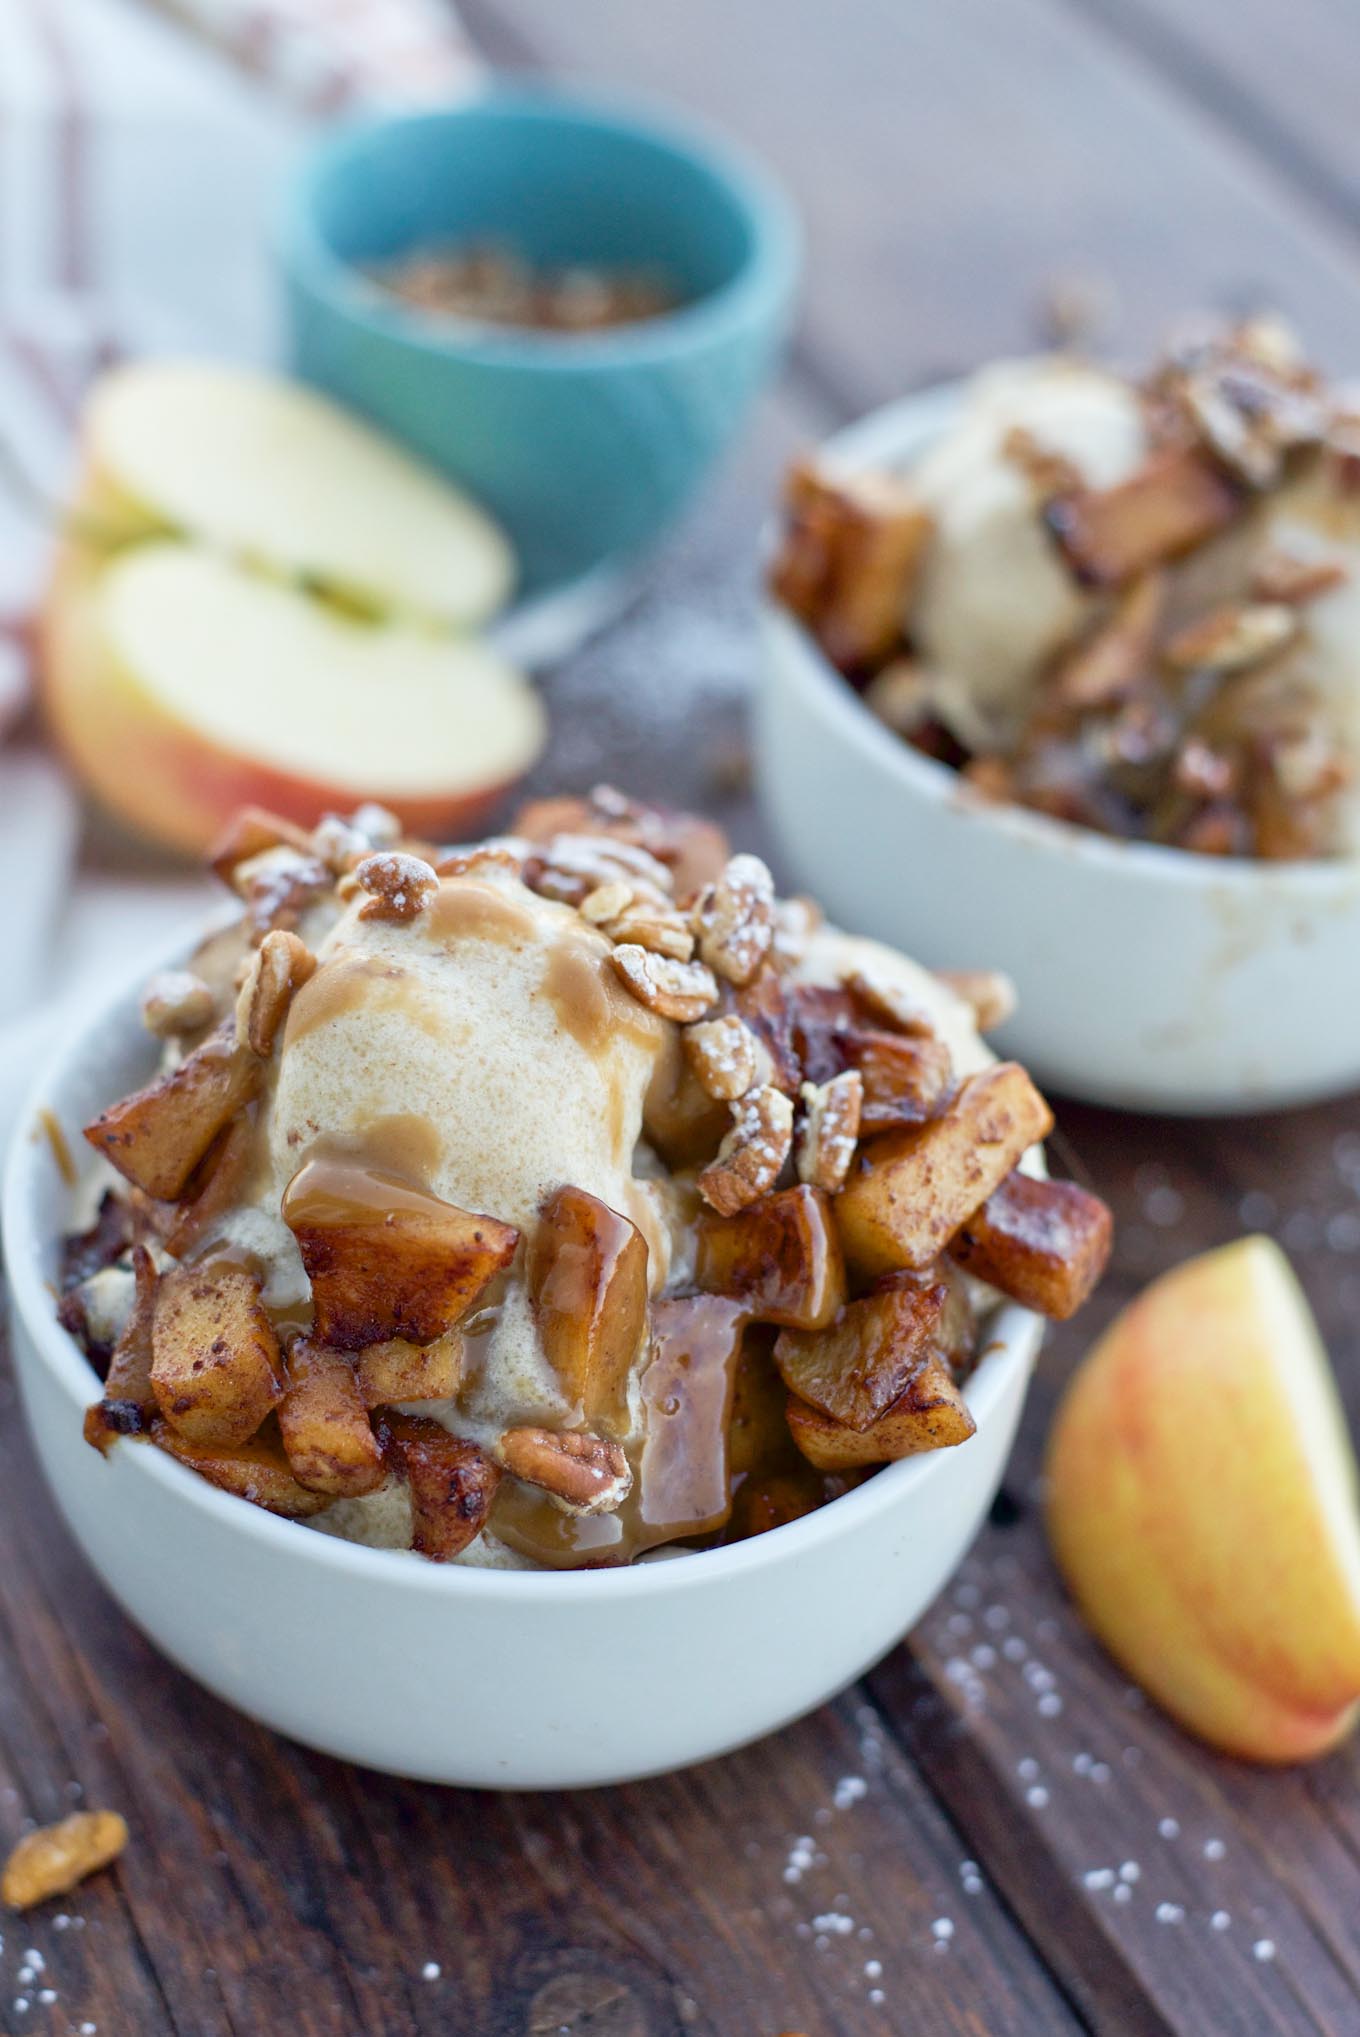 Easy 2-step Caramel Apple Cider Ice Cream bring all the flavors to fall in a delicious dessert.